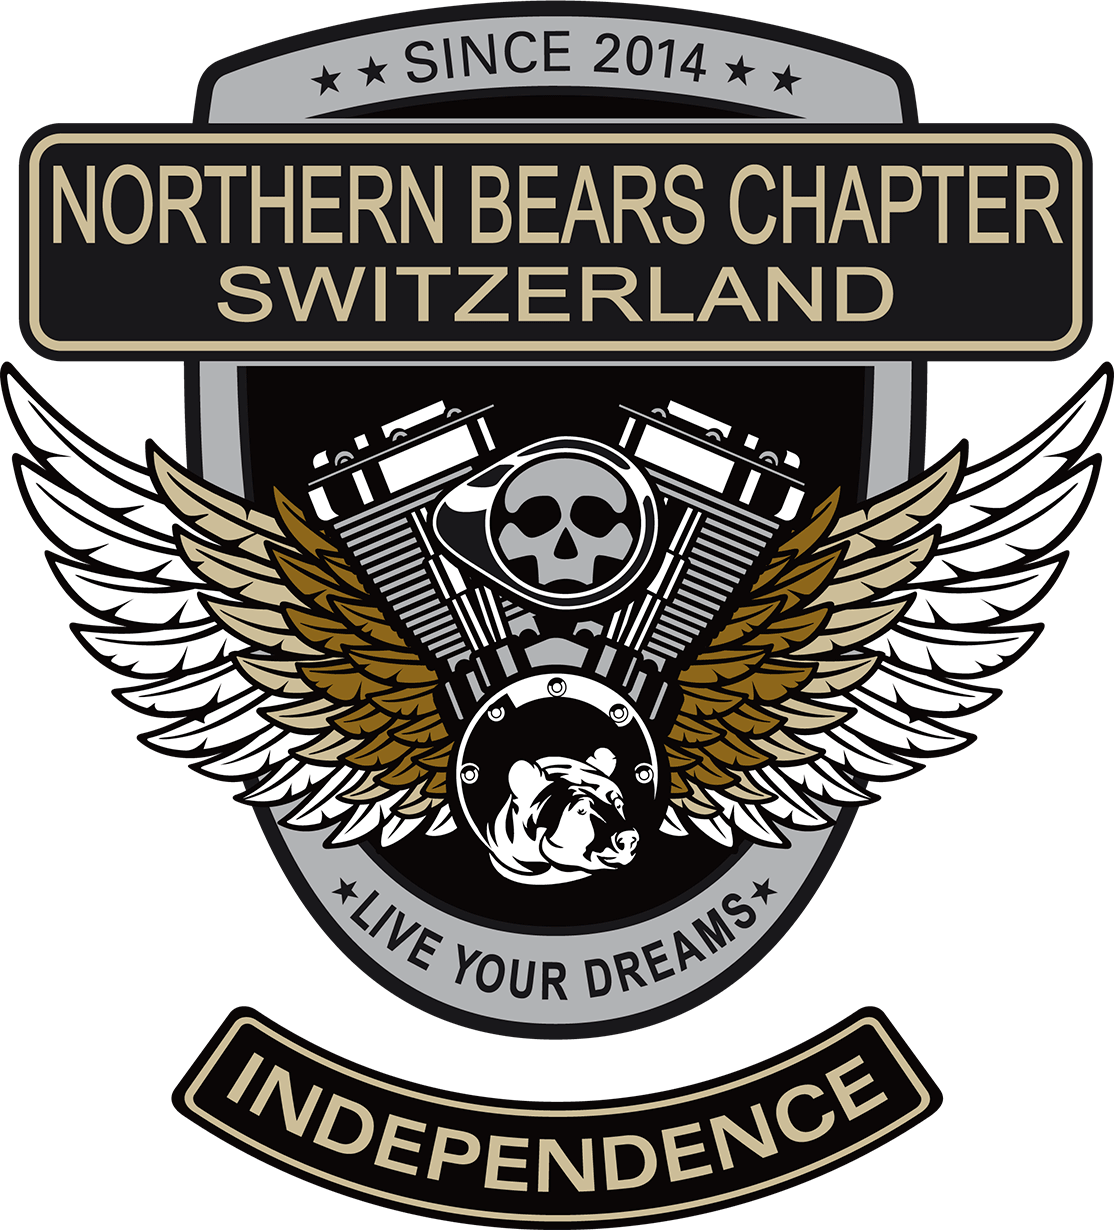 Northern Bears Chapter